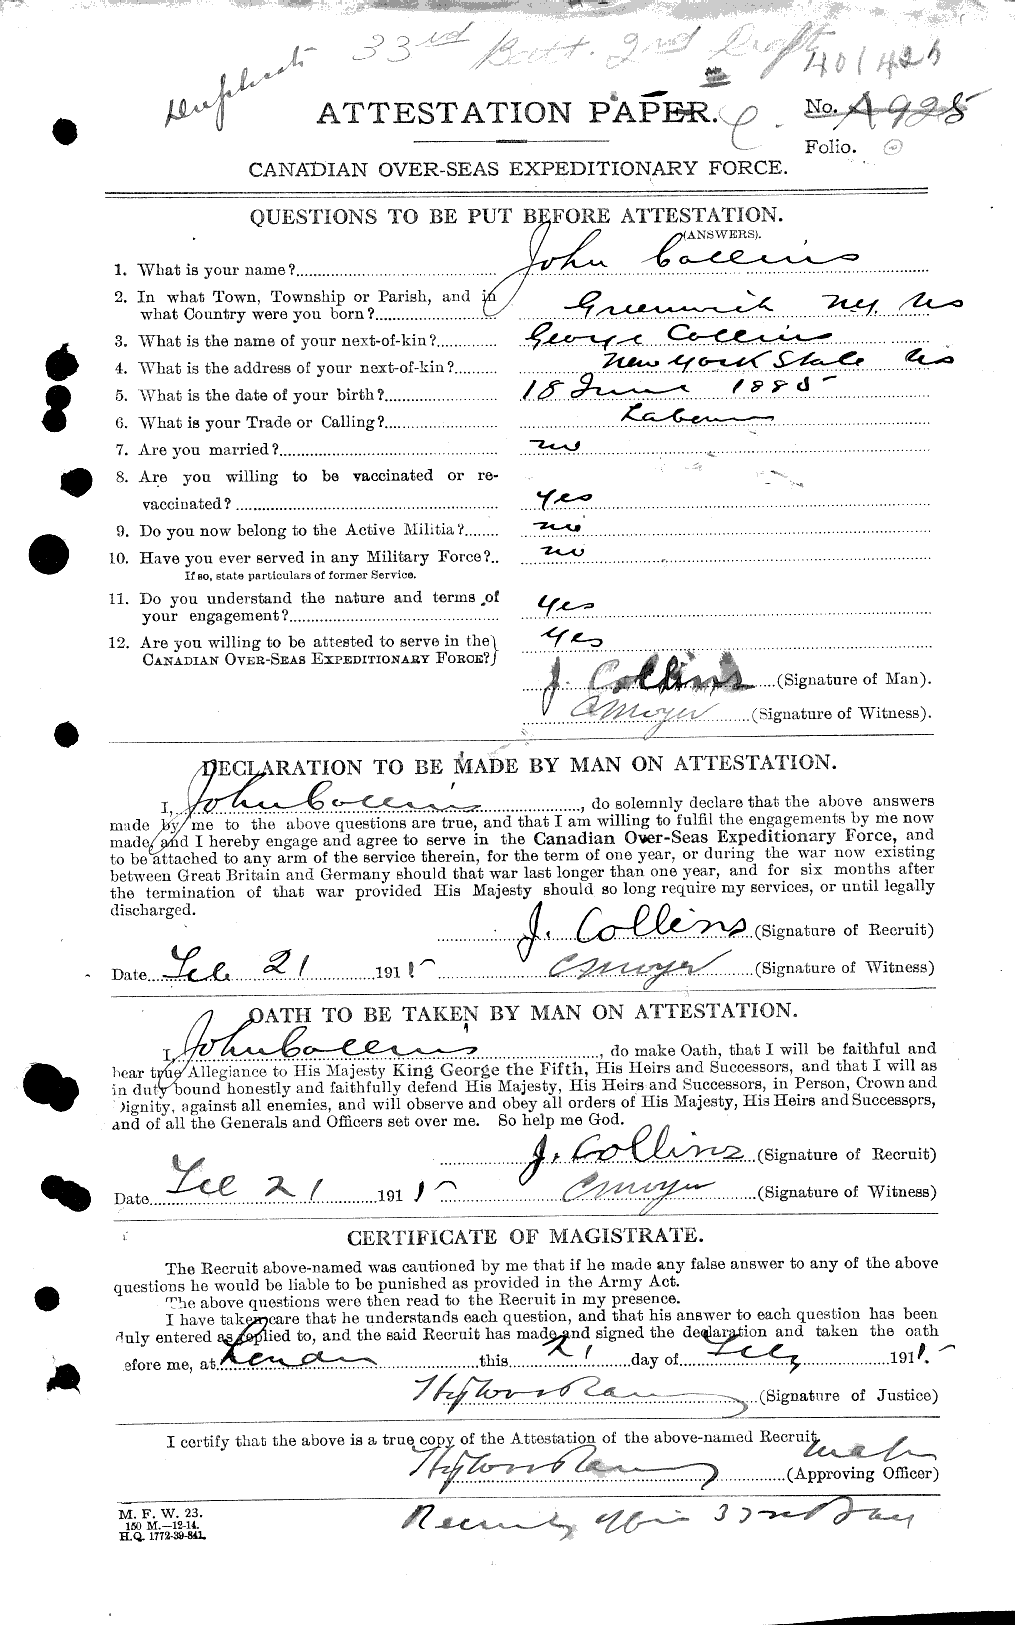 Personnel Records of the First World War - CEF 034378a